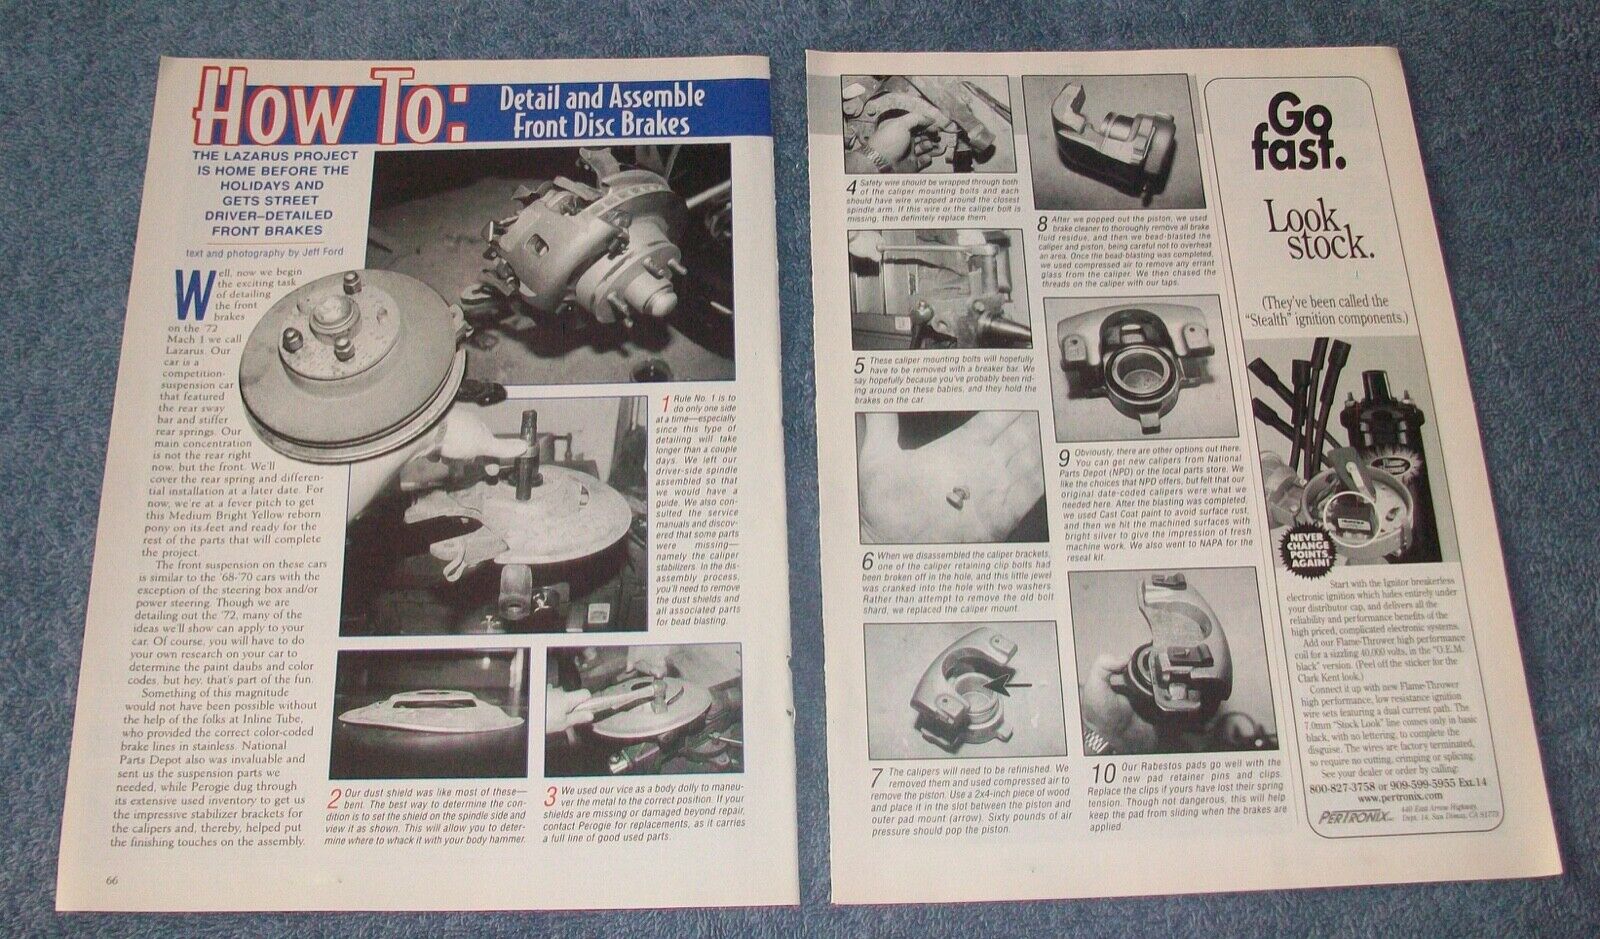 1971-73 Ford Mustang Detail and Assemble Front Disk Brakes How-To Tech Article